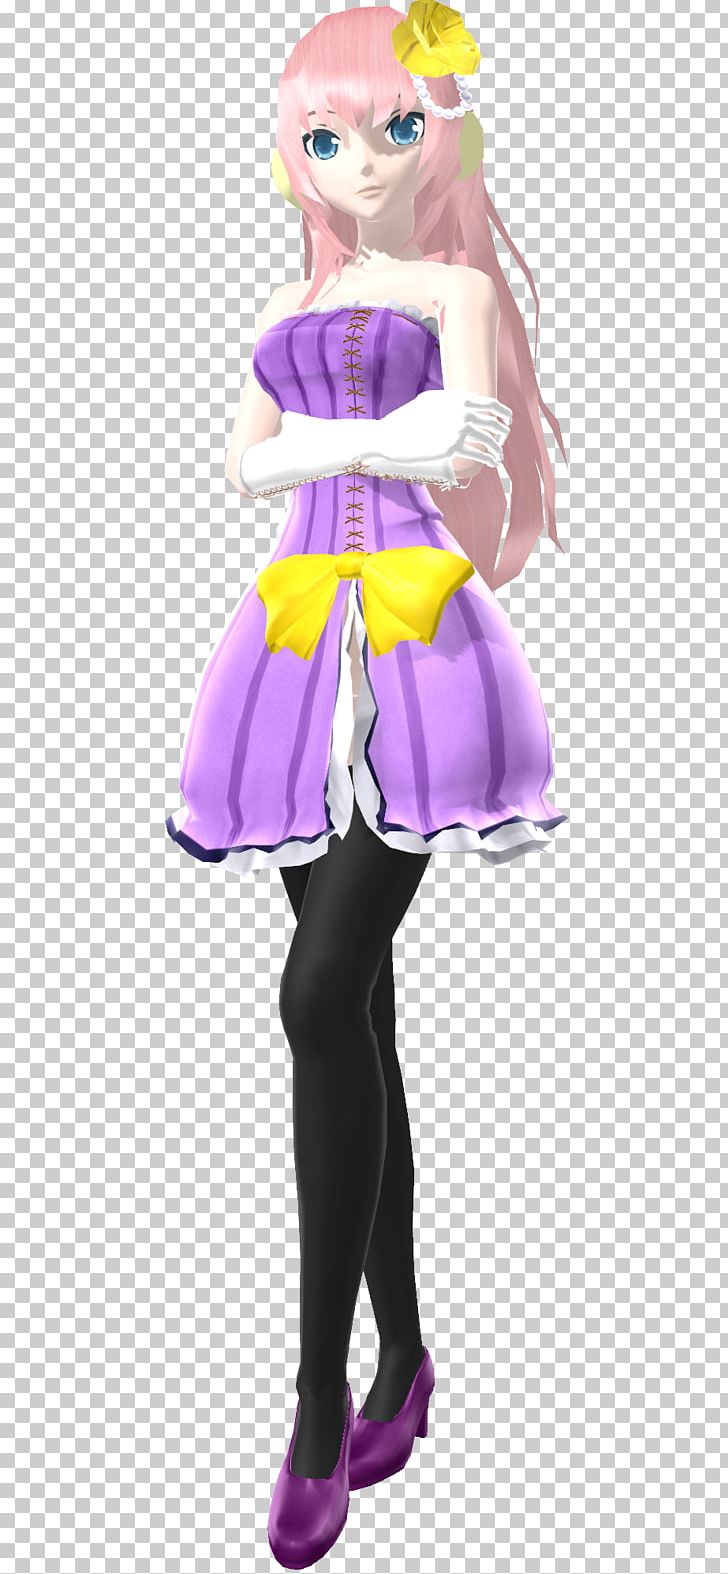 Macaron Macaroon Megurine Luka Vocaloid Meiko PNG, Clipart, Anime, Costume, Costume Design, Doll, Fairy Free PNG Download